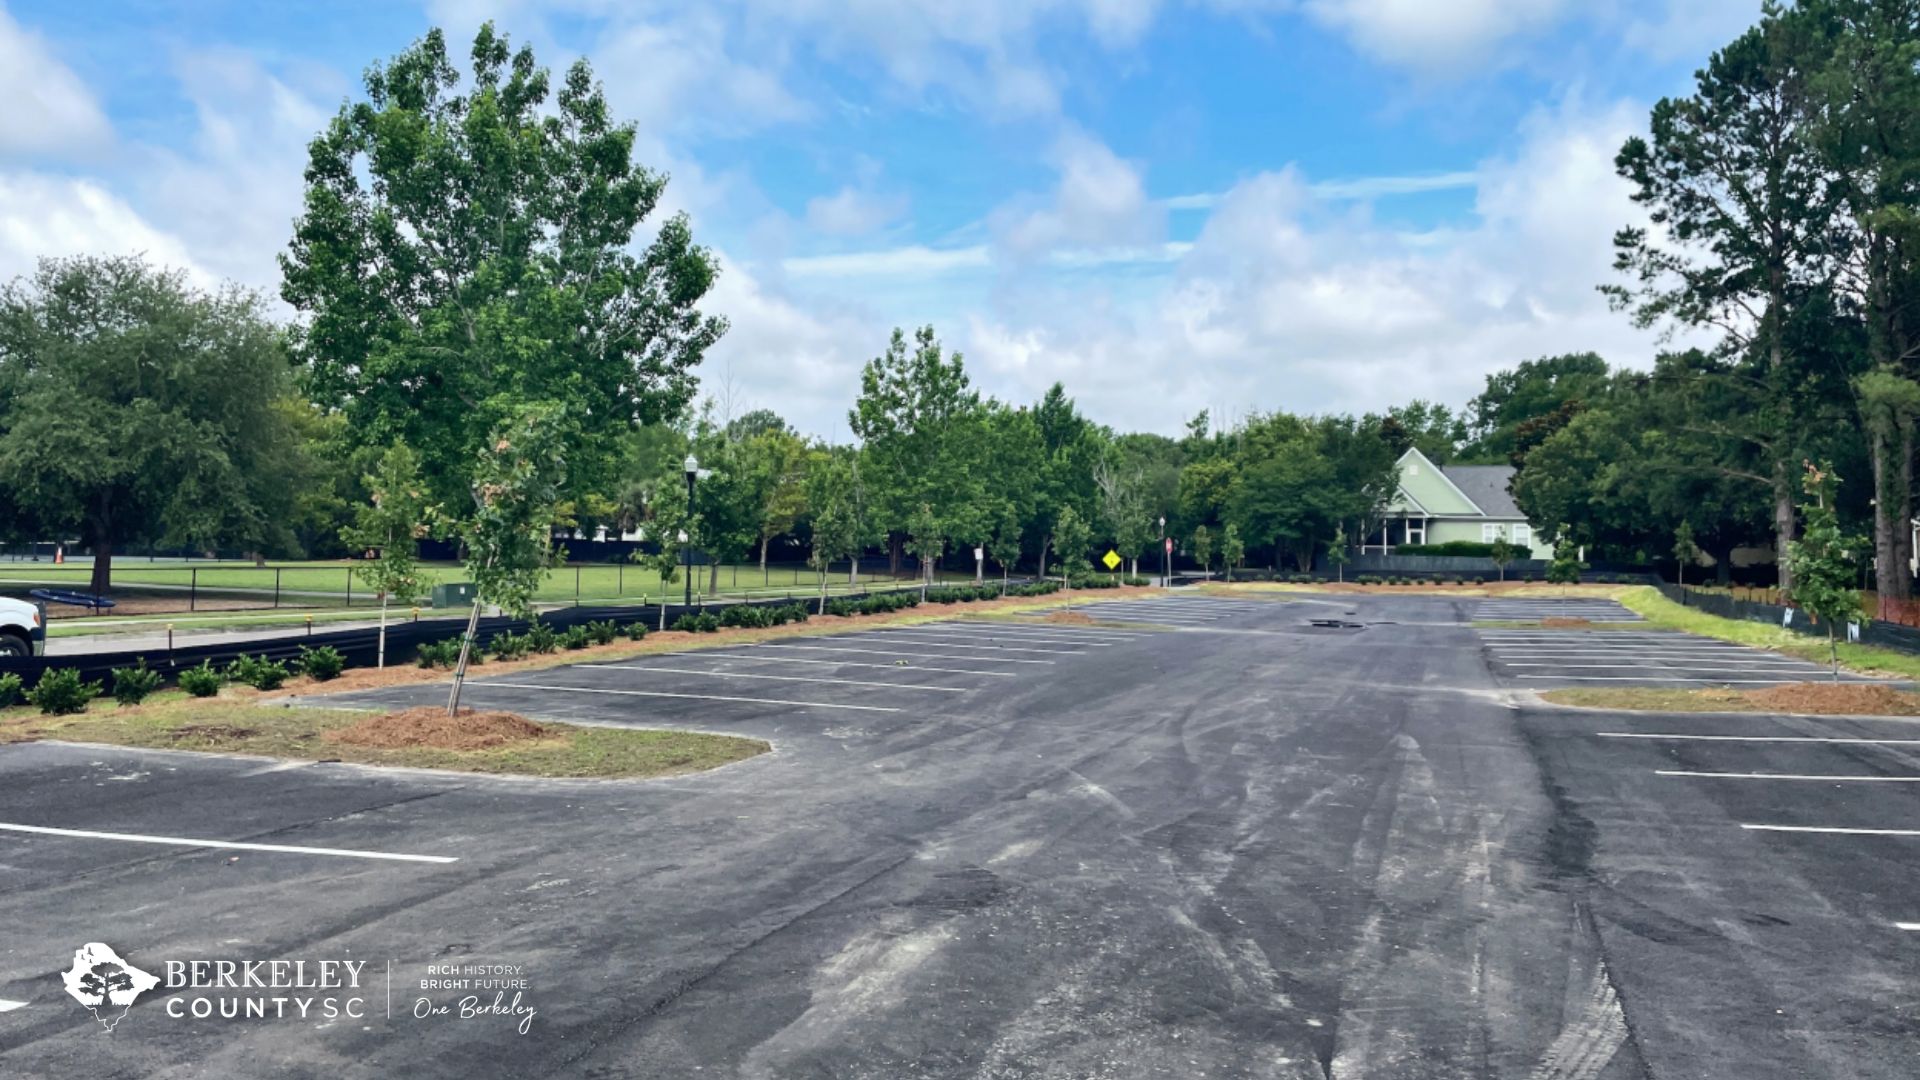 Berkeley County Completes Daniel Island Parking Lot Expansion Project